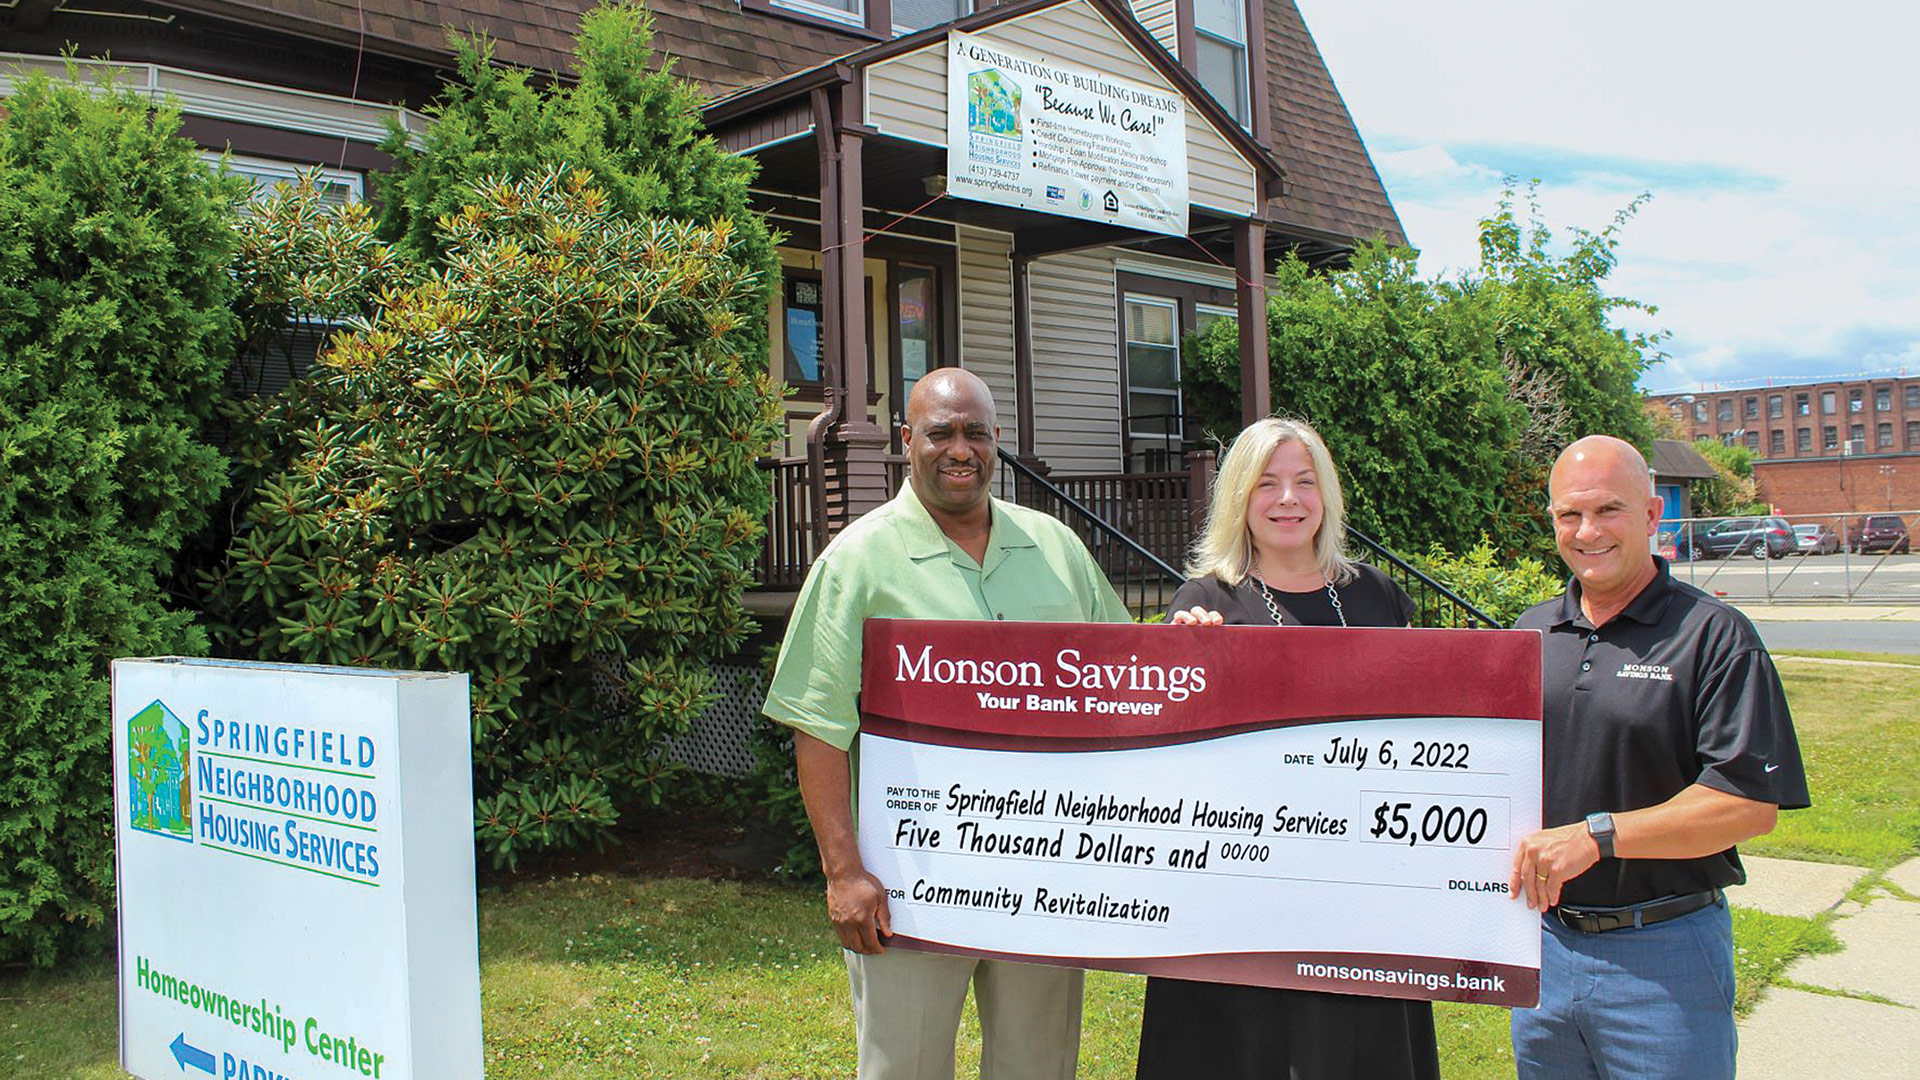 bank President and CEO Dan Moriarty (right) and Dina Merwin, the bank’s senior vice president, chief risk and senior compliance officer (center), visit Leo Williams, president and CEO of Springfield Neighborhood Housing Services, to present his organization with a $5,000 donation.